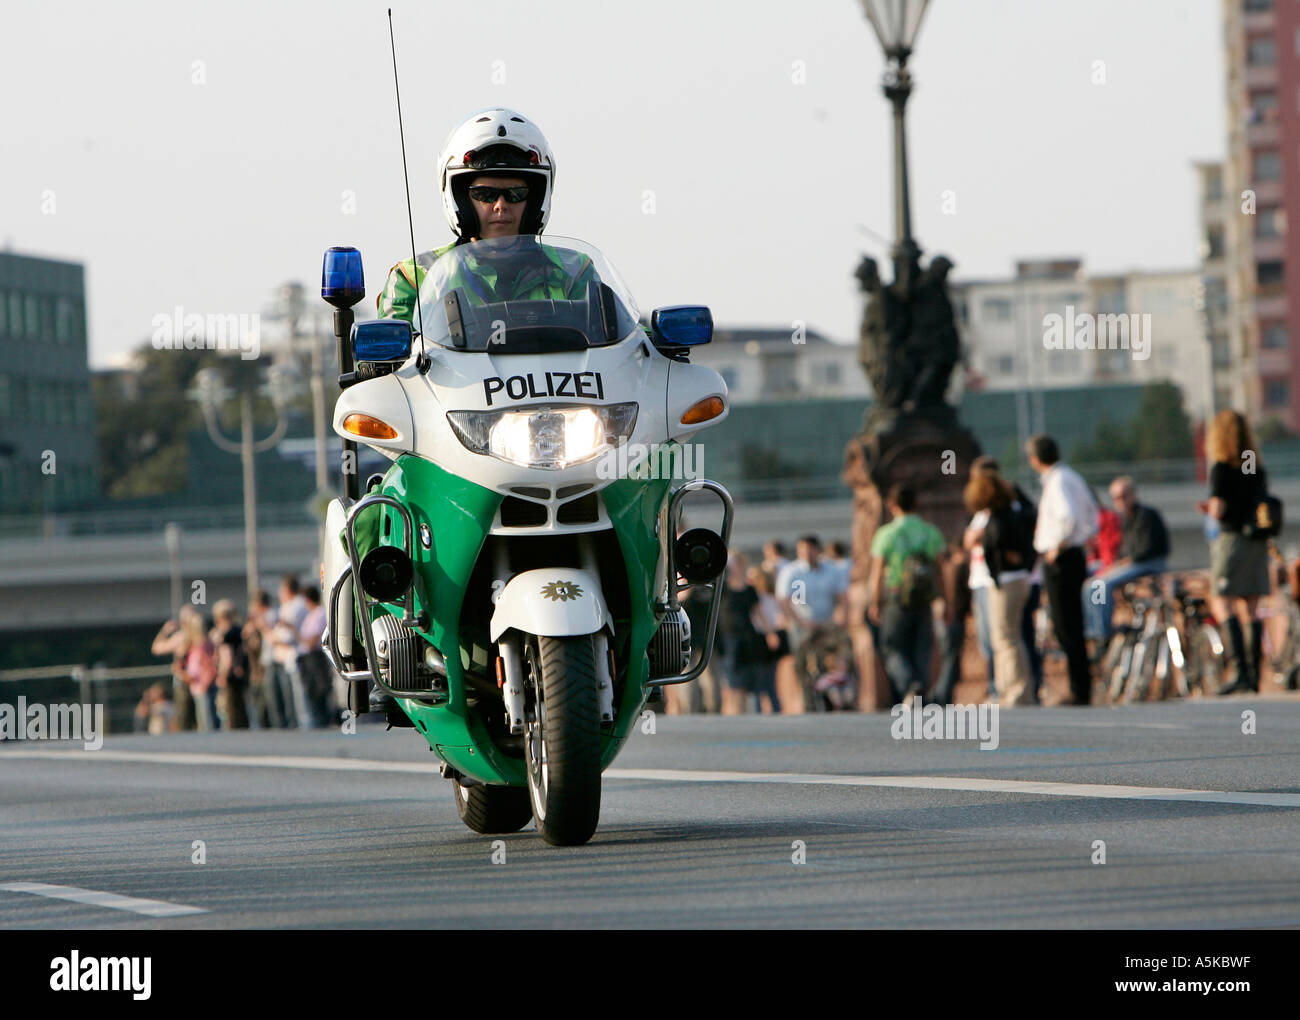 Police motorcyclist patrols on the road Stock Photo